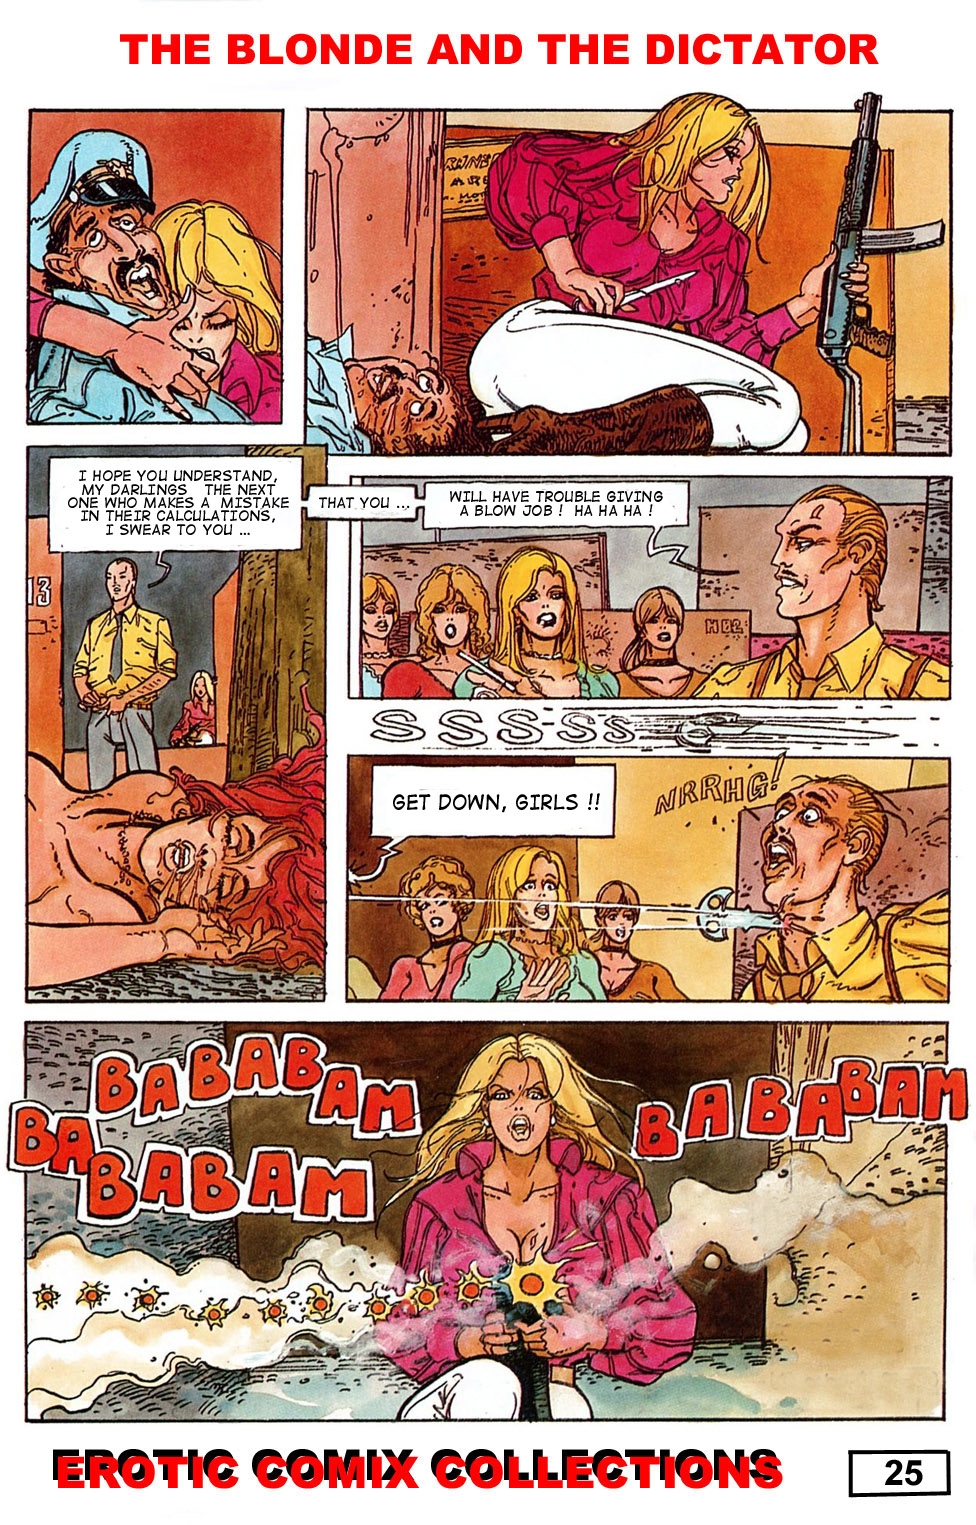 CHARLIE LOGAN #2 - THE BLONDE AND THE DICTATOR - A MALINVAUD TRANSLATION 26